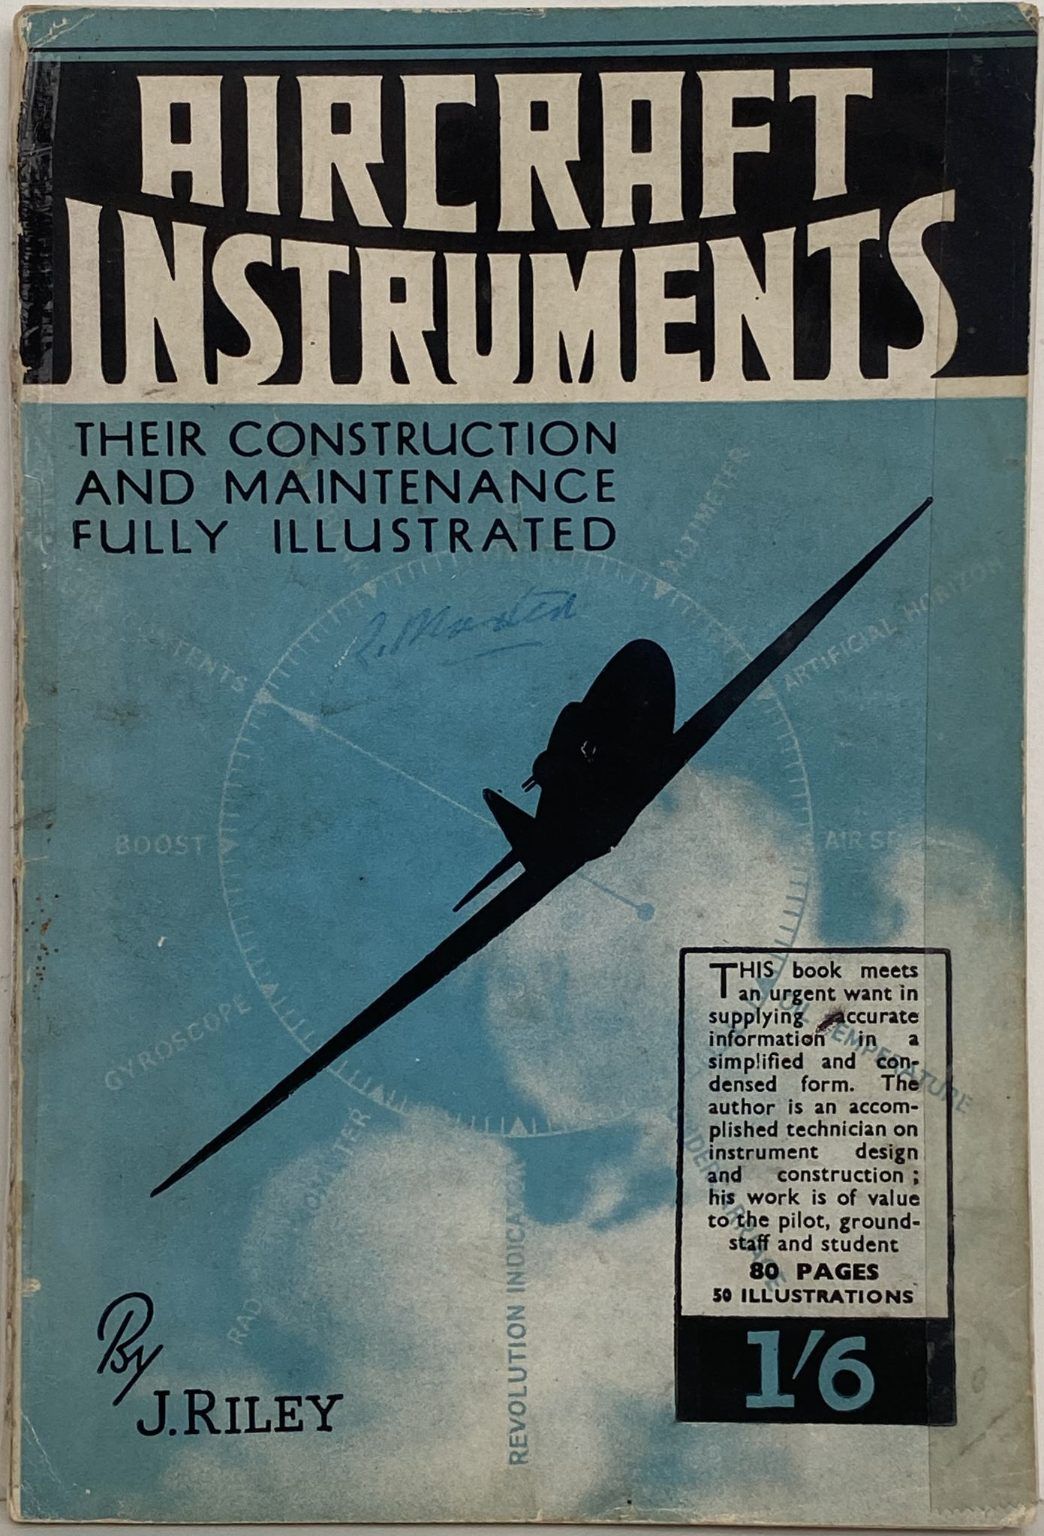 AIRCRAFT INSTRUMENTS: Their Construction And Maintenance